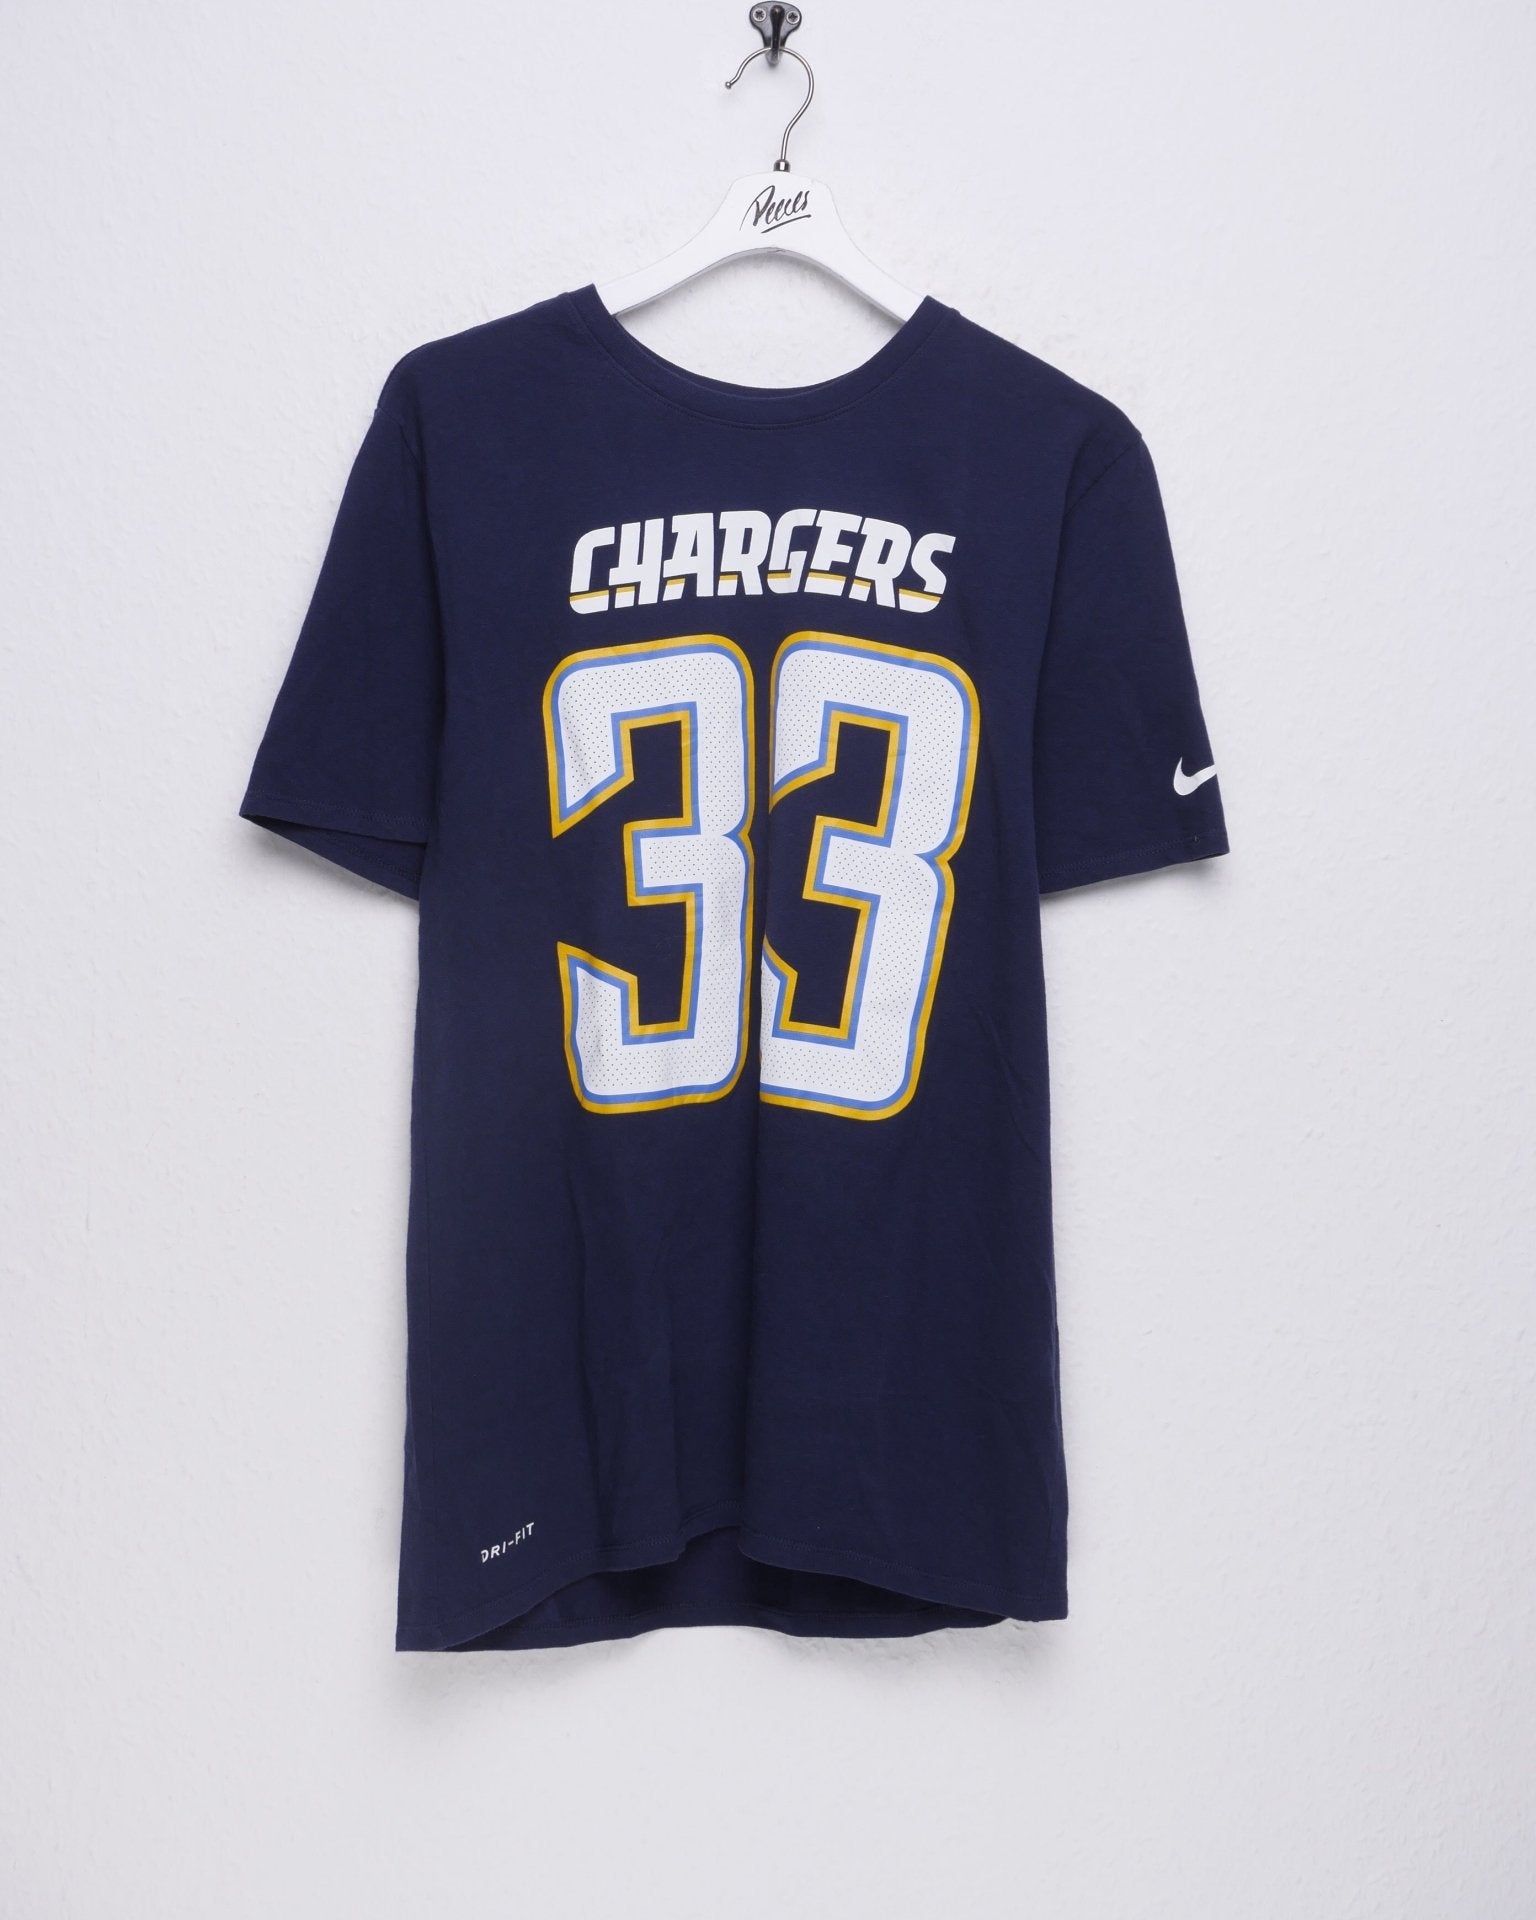 Nike printed Chargers Graphic Vintage Shirt - Peeces